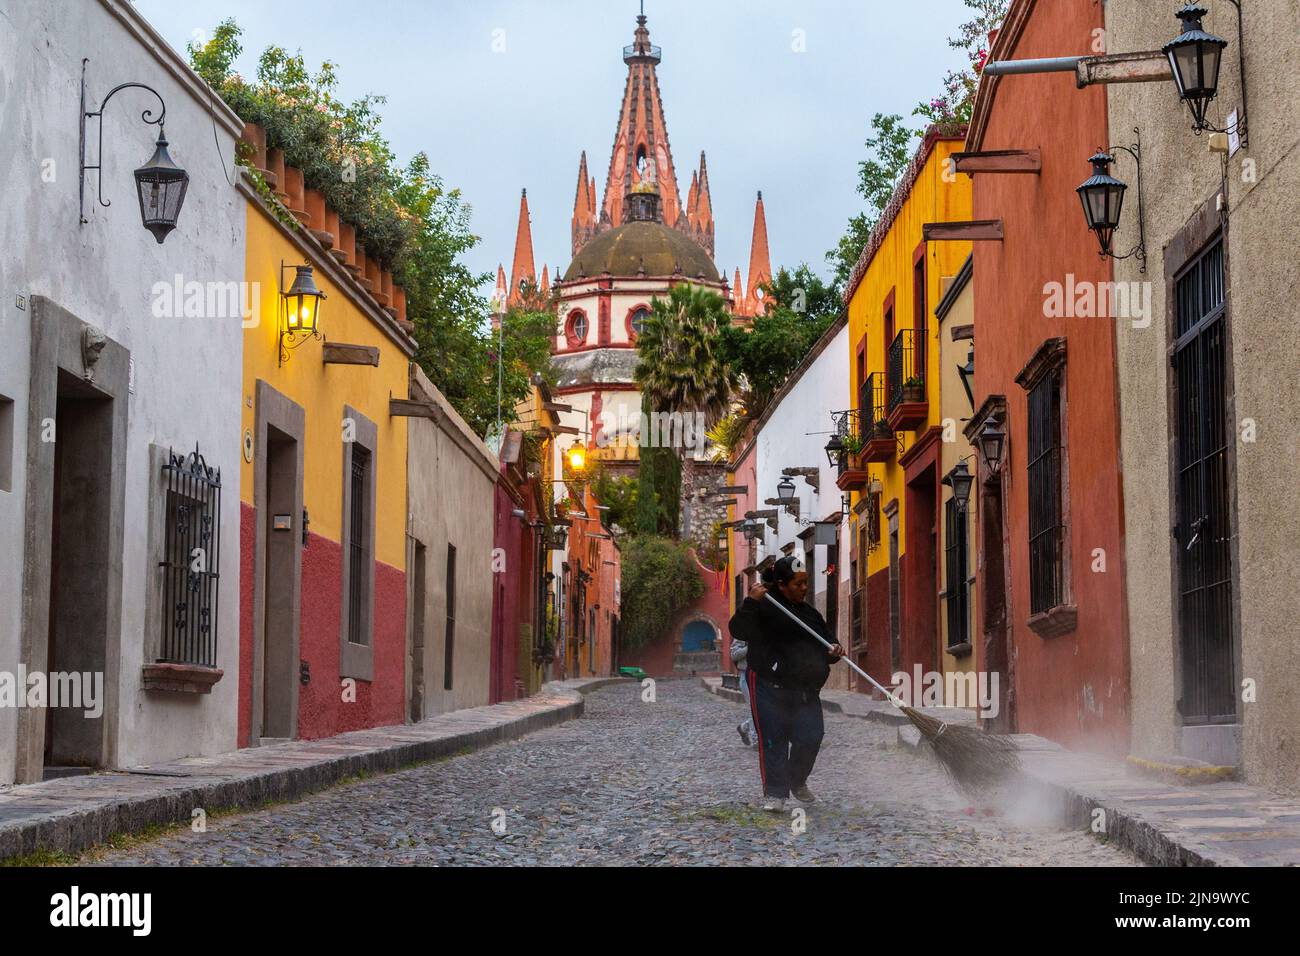 A street cleaner sweeps the cobblestone streets of Calle Aldama early morning in the historic city center of San Miguel de Allende, Mexico. Stock Photo